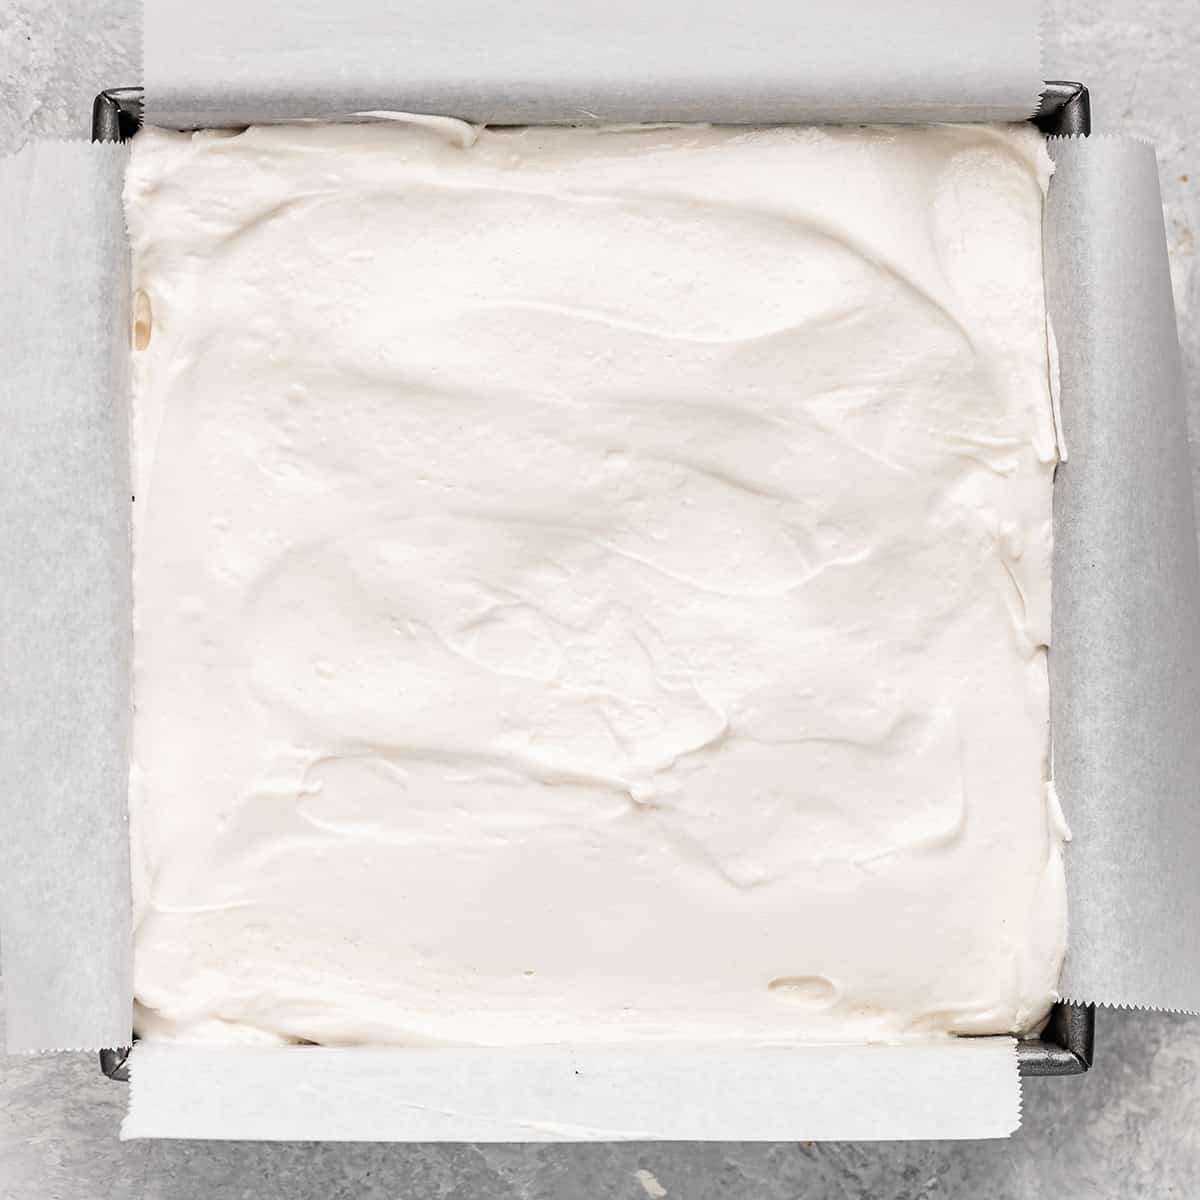 homemade marshmallow mixture spread into the bottom of the prepared pan